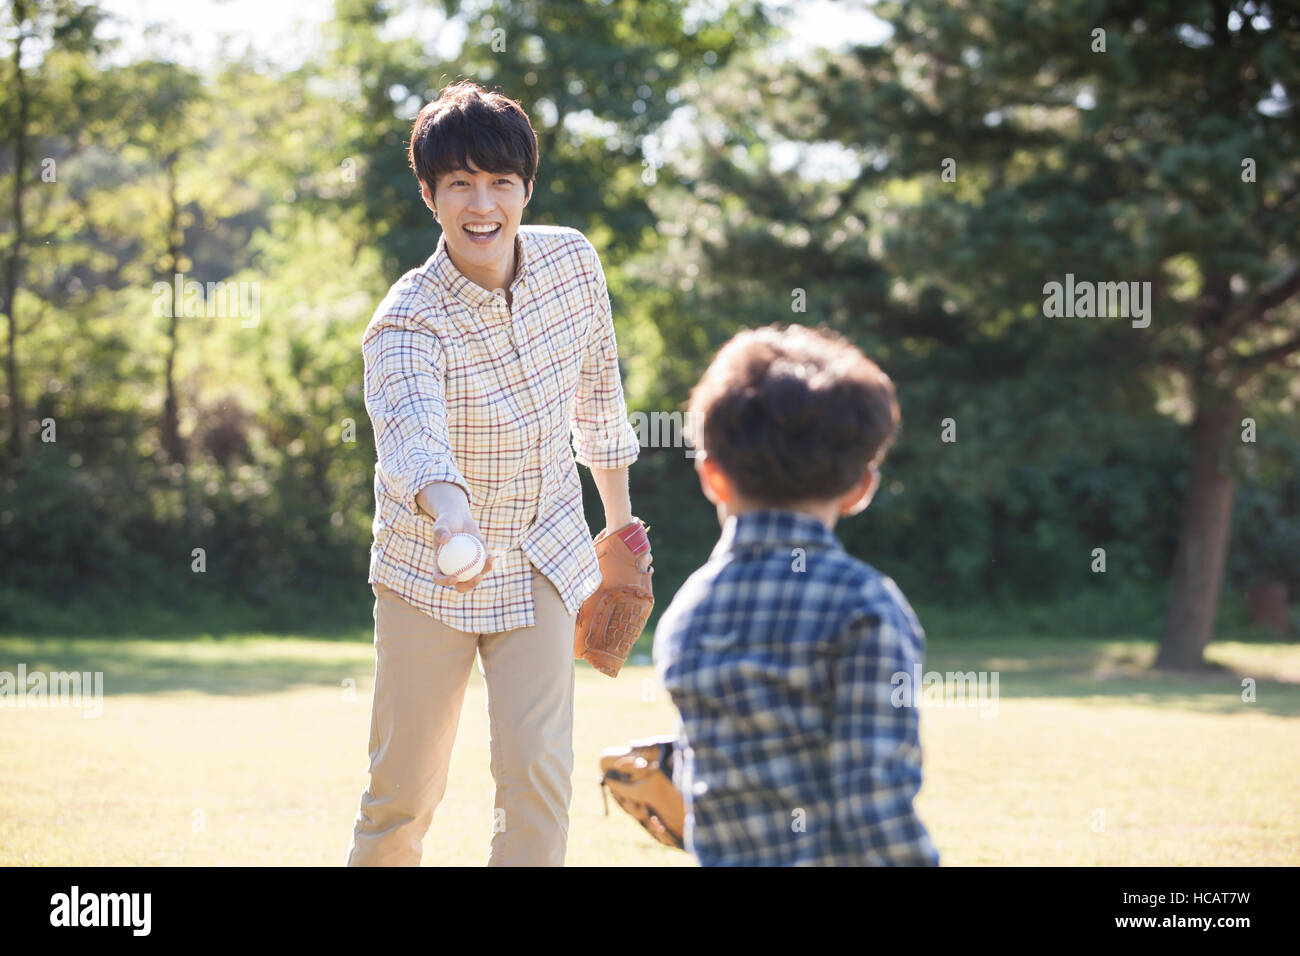 Loving father throwing a ball to his five-year-old son on grassland Stock Photo